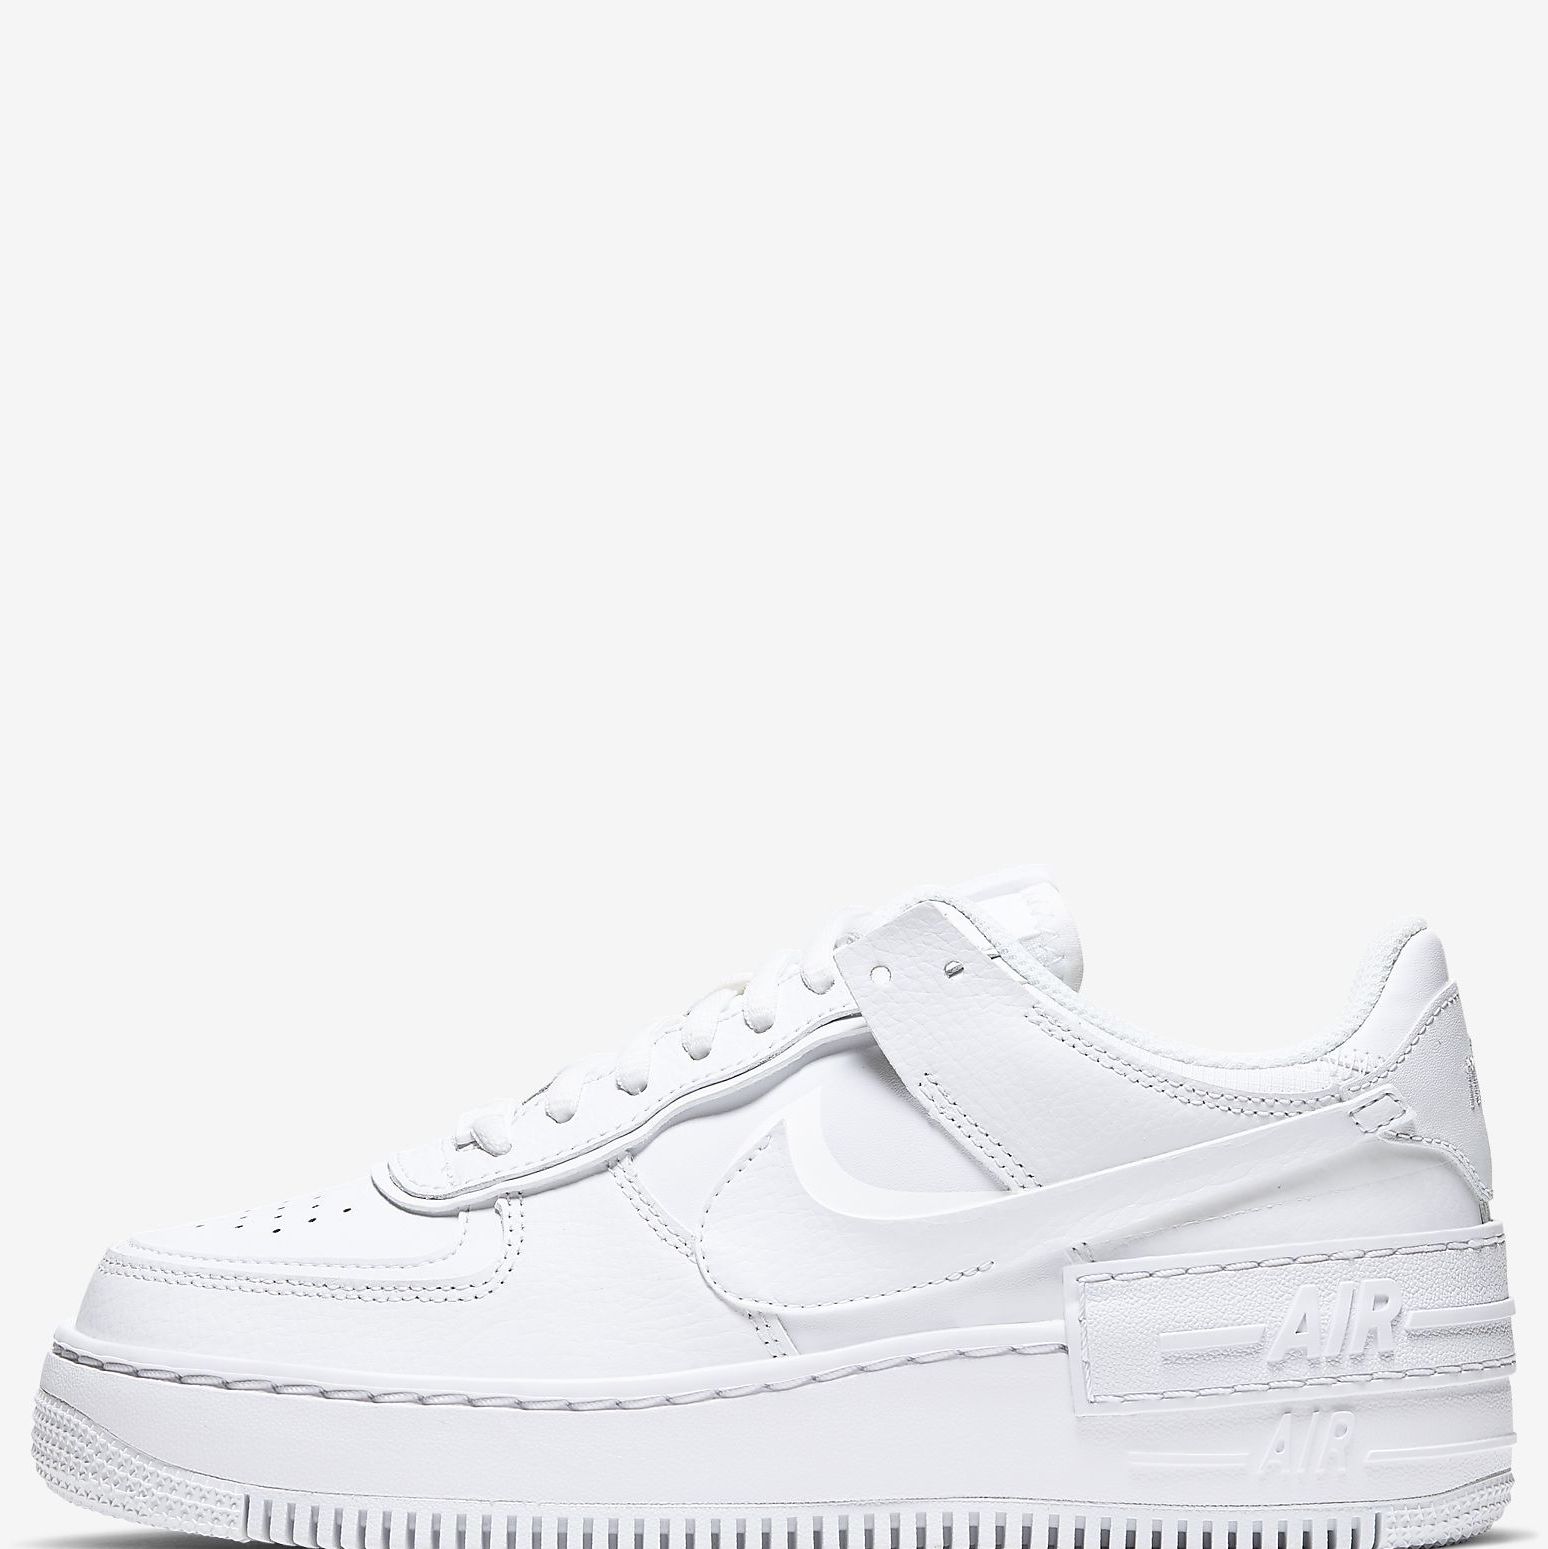 The Best Nike Air Force 1 Sneakers To Shop Cool Air Force 1s